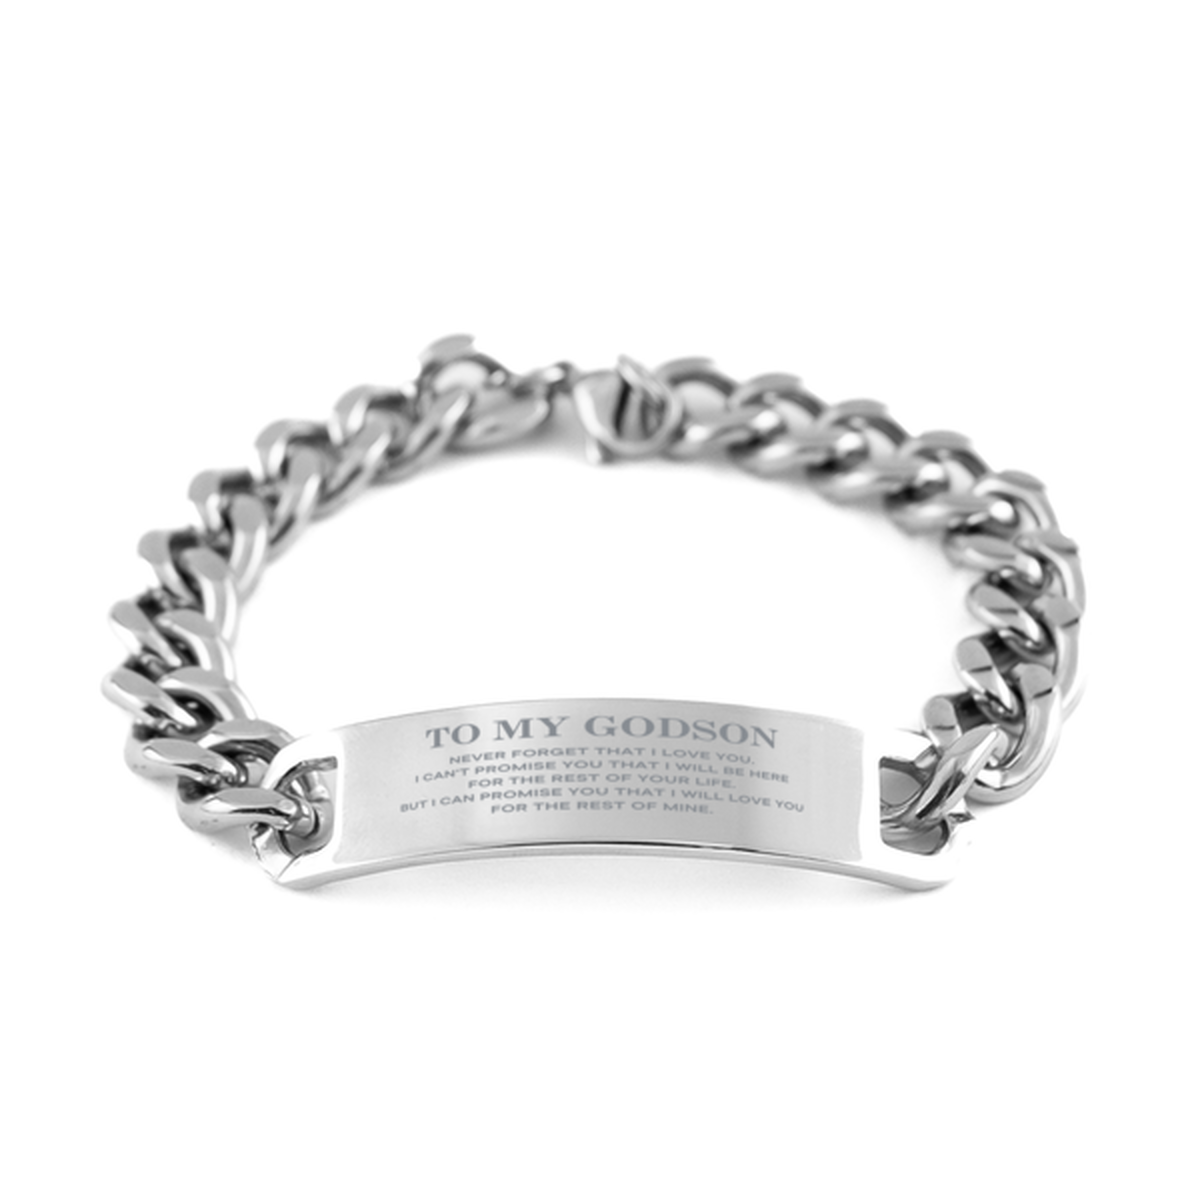 To My Godson Gifts, I will love you for the rest of mine, Love Godson Bracelet, Birthday Christmas Unique Cuban Chain Stainless Steel Bracelet For Godson